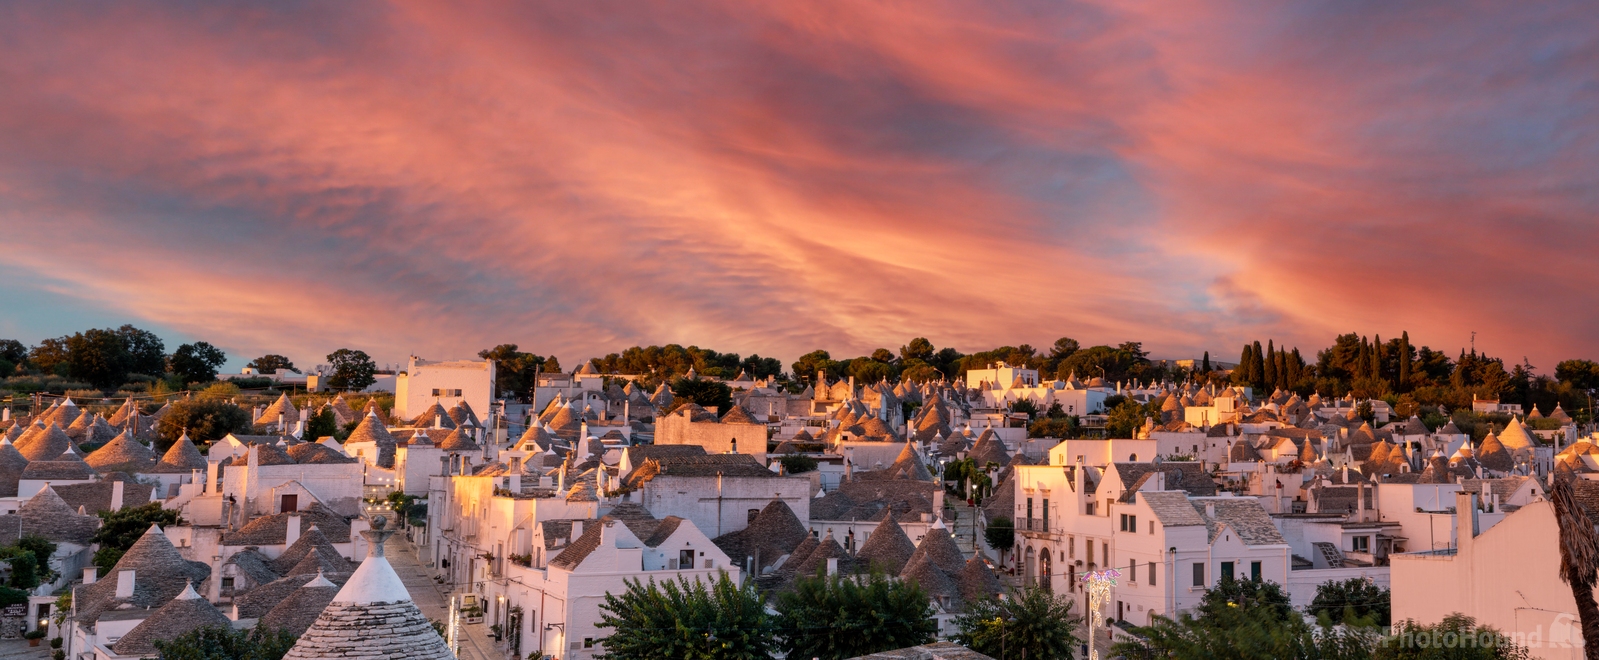 Image of Trulli village Viewpoint by Thom Newman